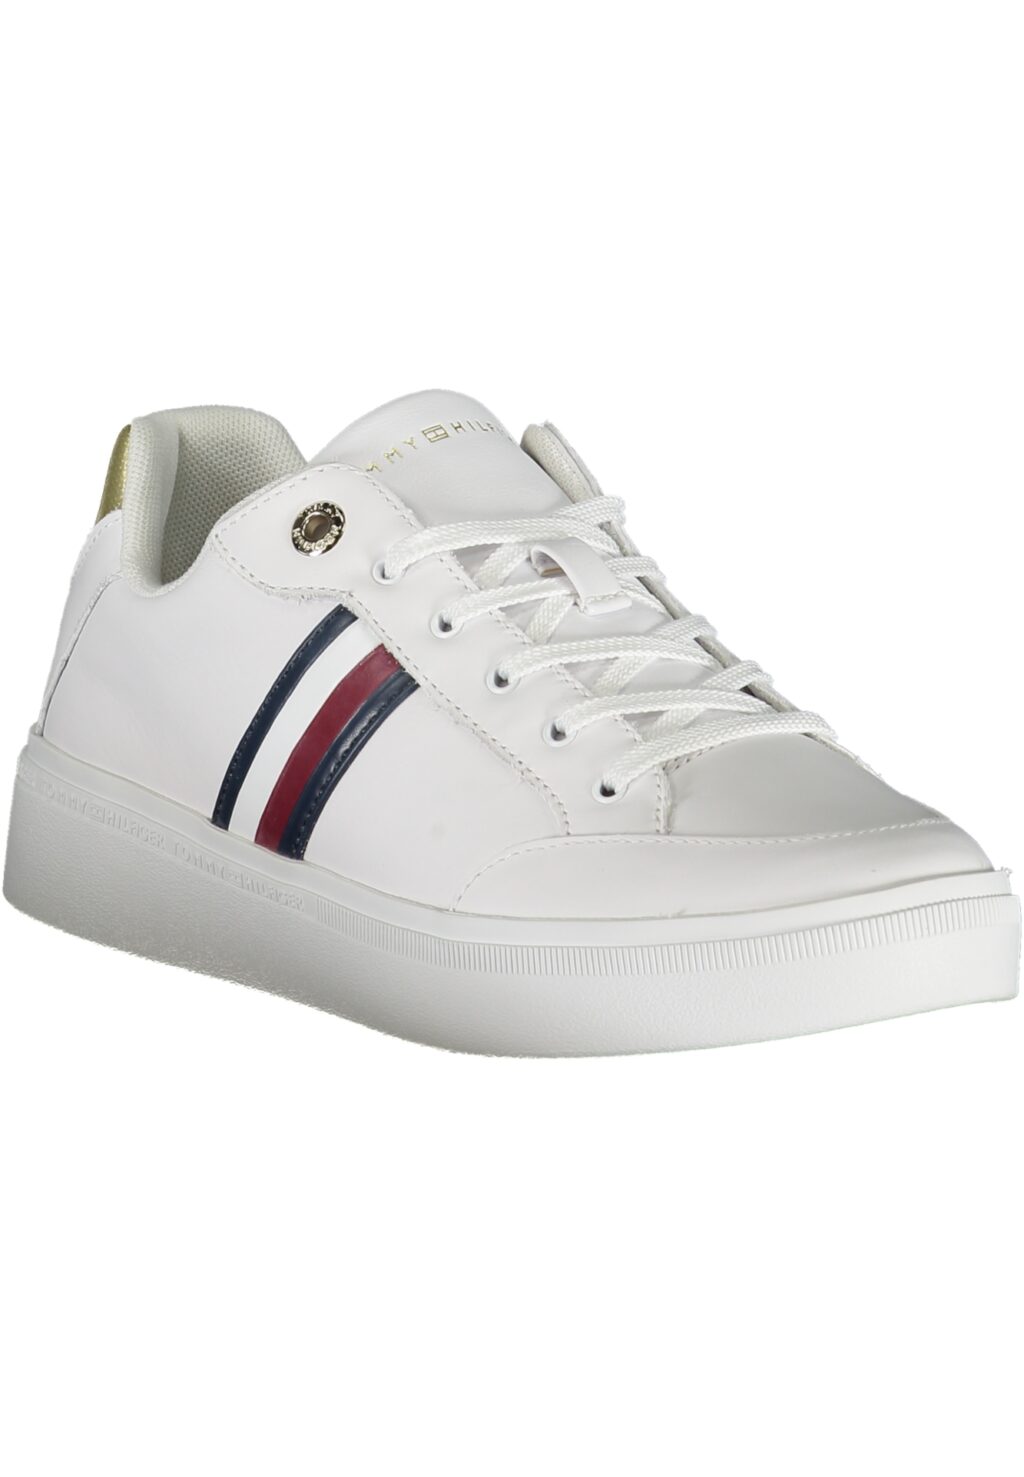 TOMMY HILFIGER WHITE WOMEN'S SPORTS SHOES FW0FW07446F_BIYBS